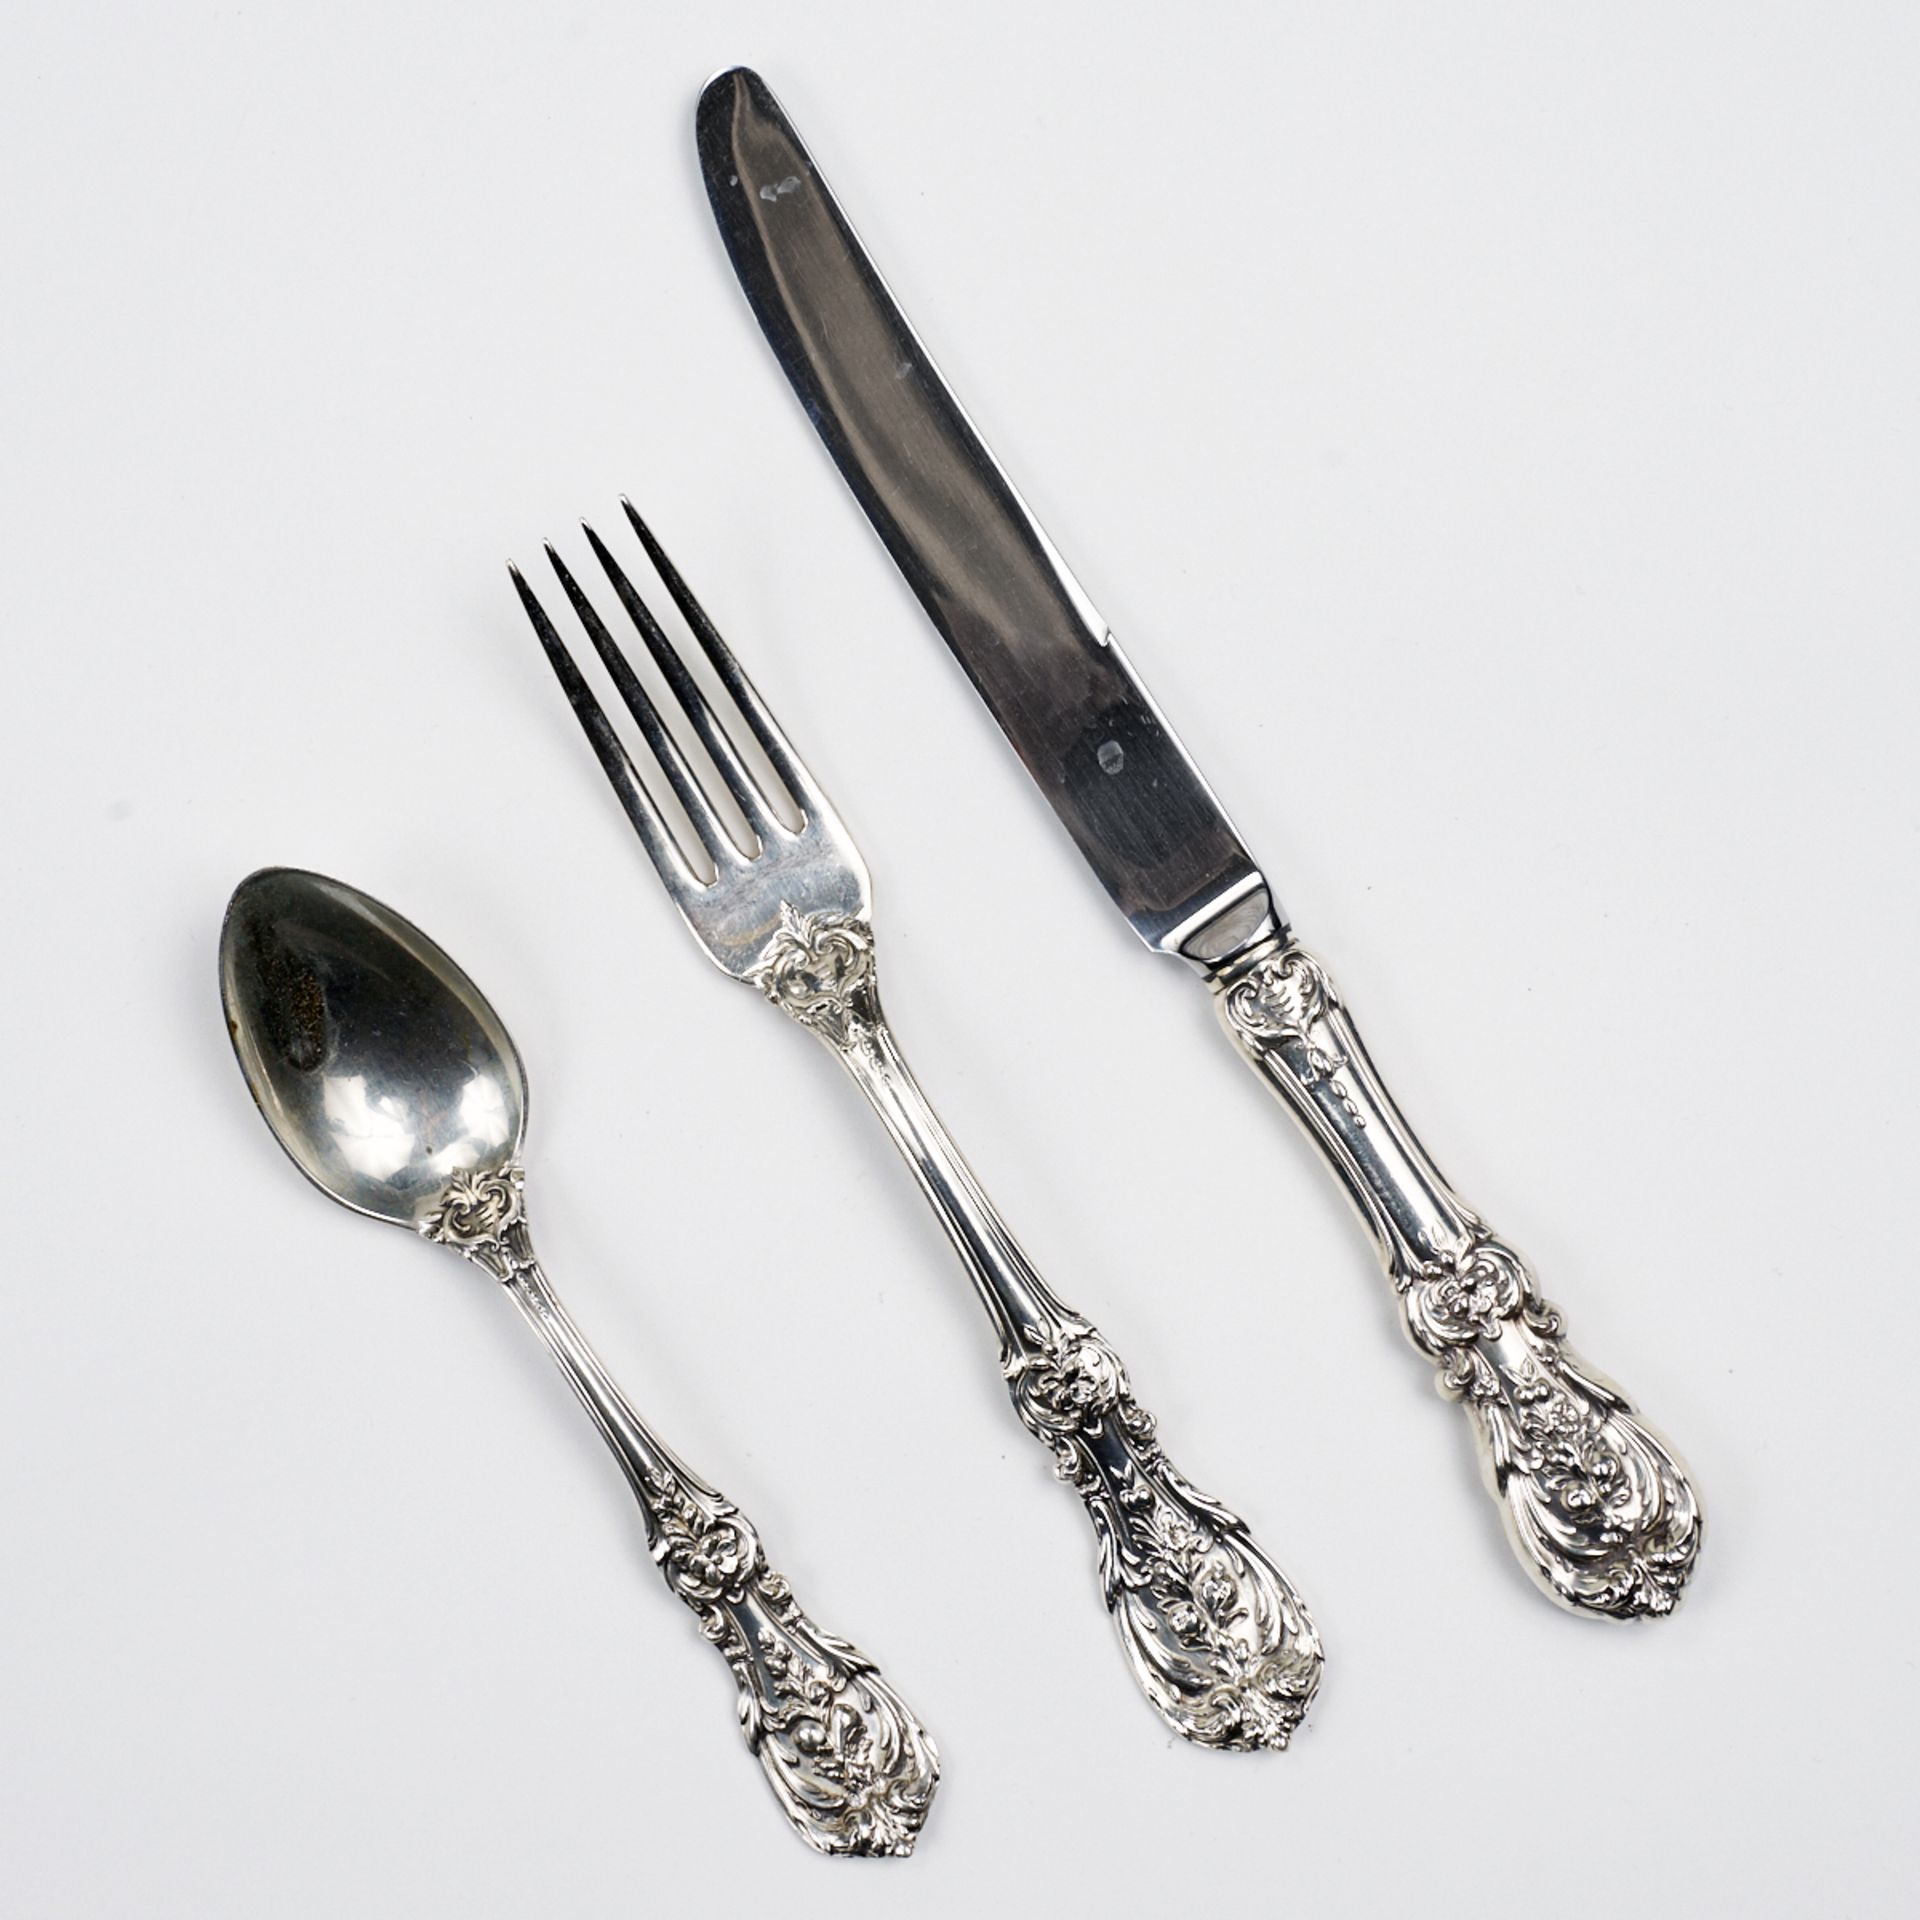 Set of Reed & Barton Francis I Sterling Silver Flatware - Image 3 of 6